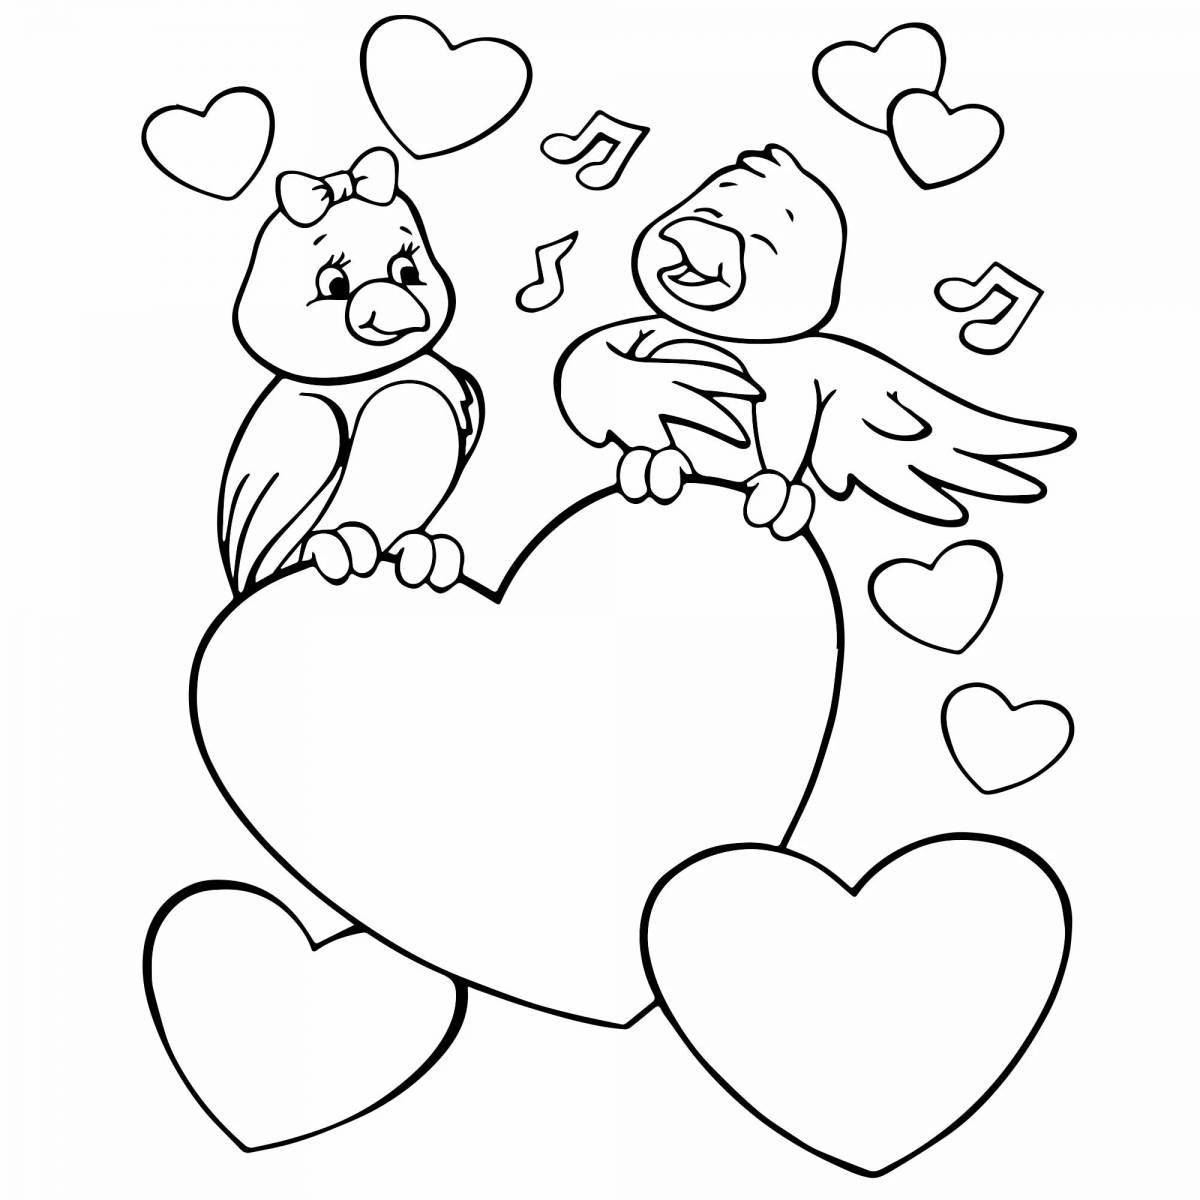 Radiant valentines coloring page for kids